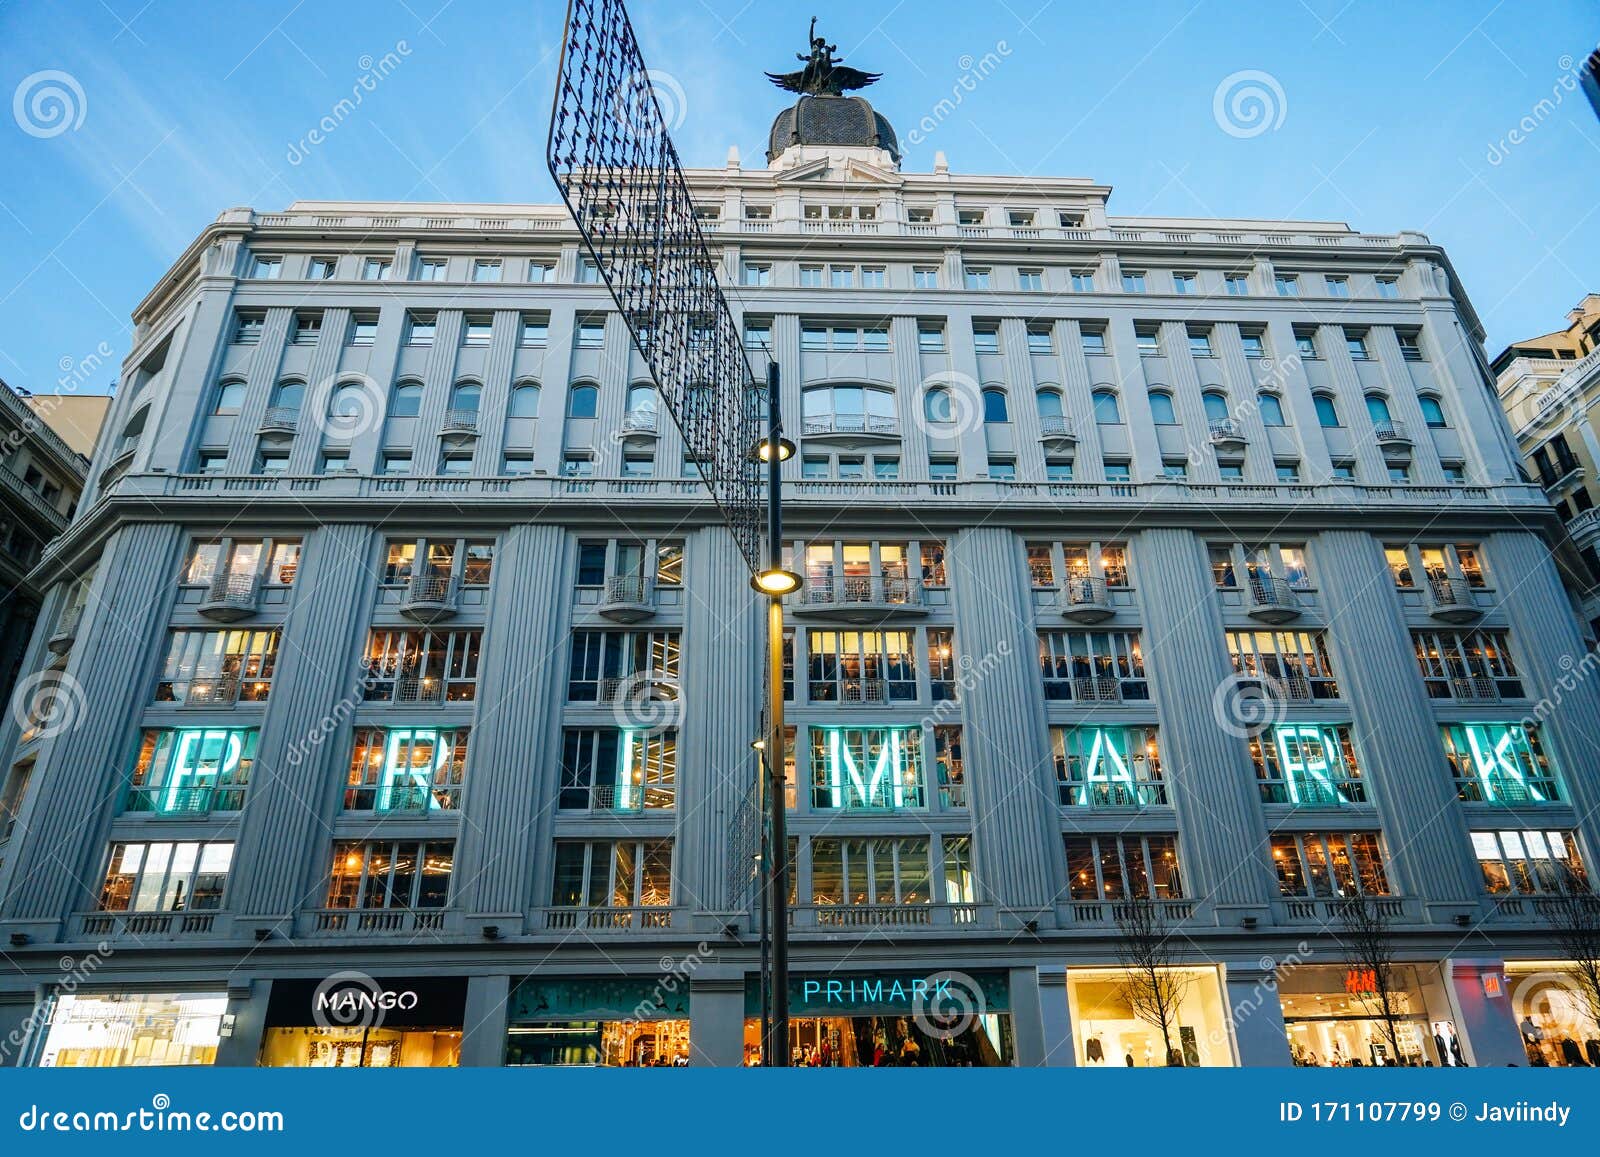 Madrid Spain December 26th 2020 Facade Of The Building Of Primark Clothes Store Editorial Stock Image Image Of Consumerism Leisure 171107799